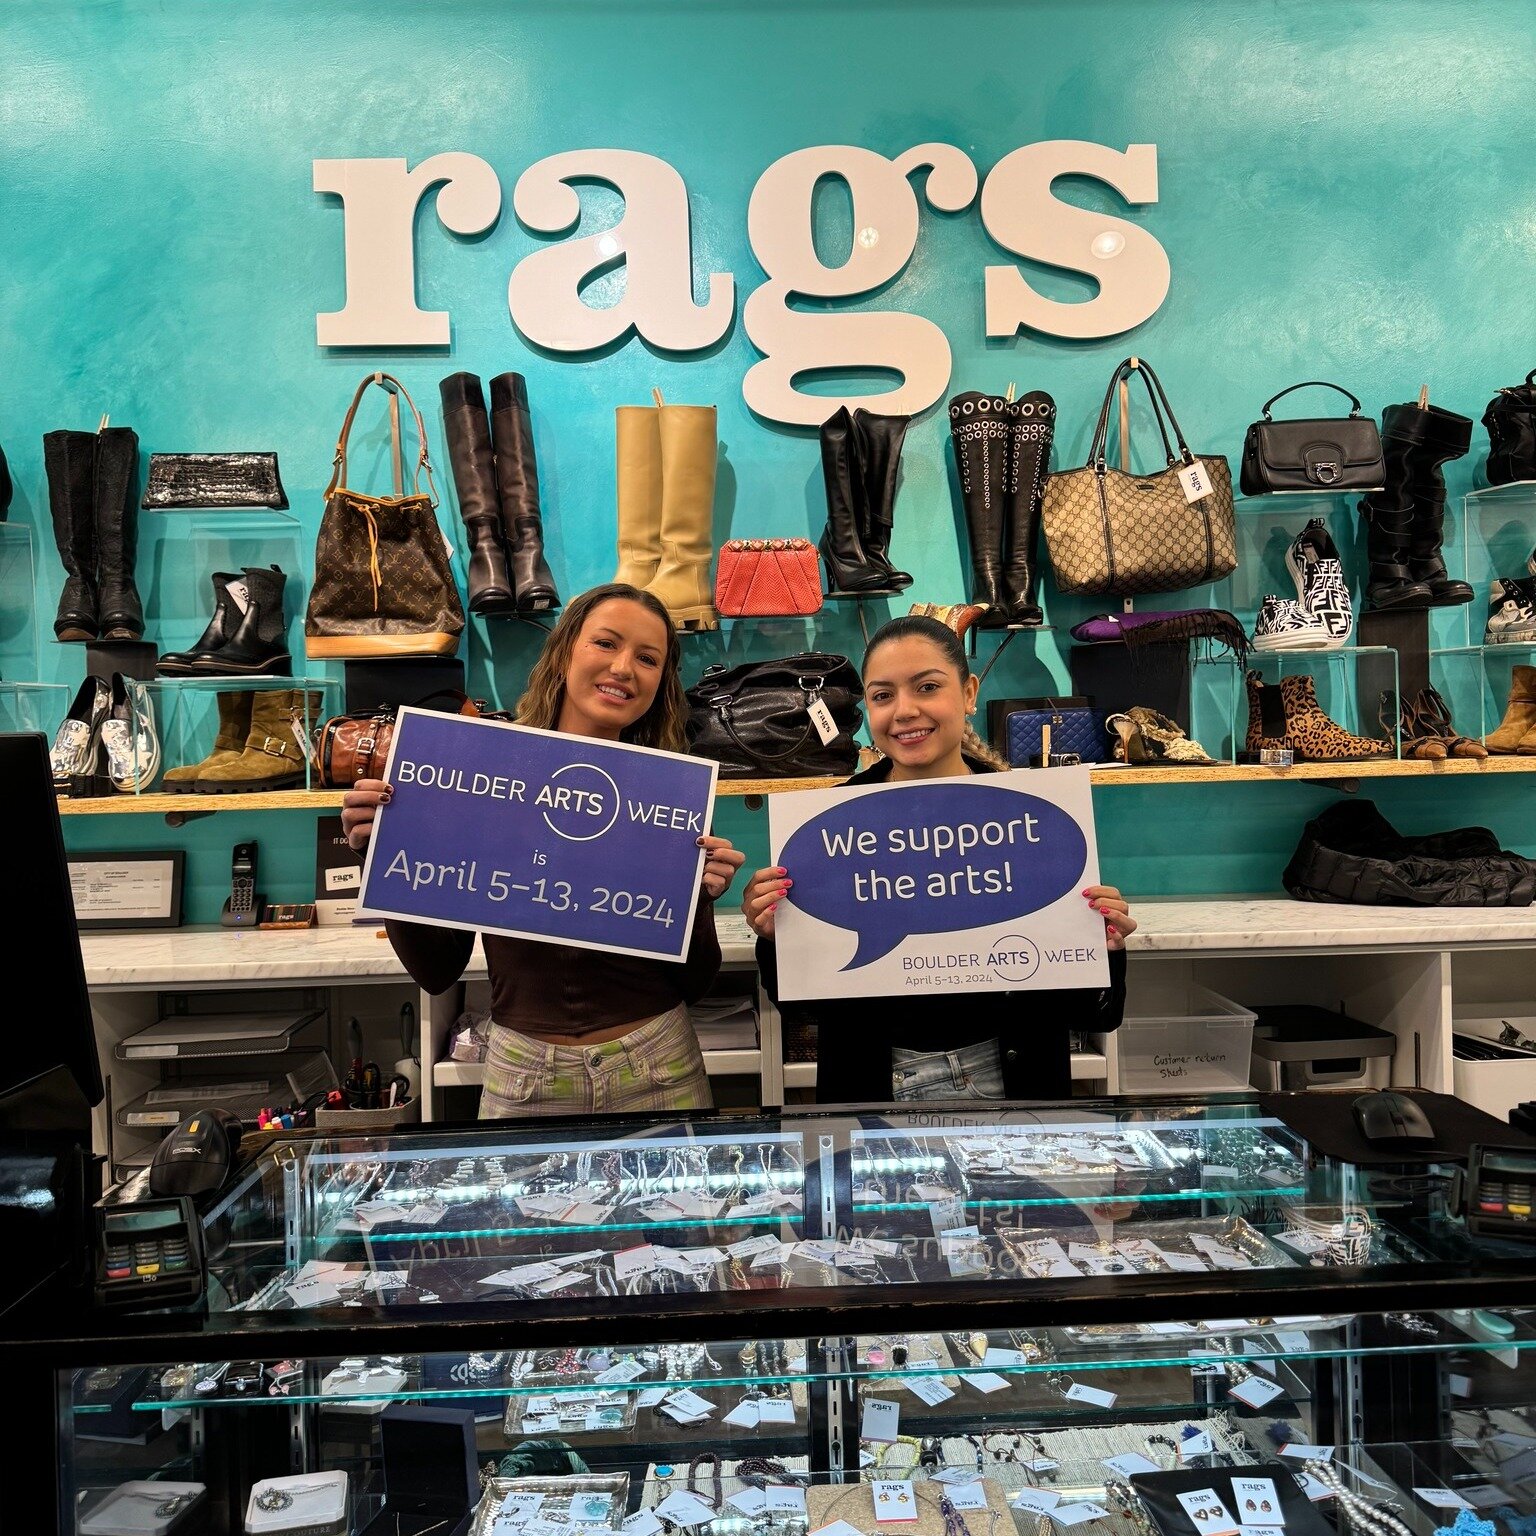 Join us for Boulder Arts Week April 5th - April 13th! New events are added to our calendar every day! https://www.boulderartsweek.org/calendar

Our local businesses help support and promote Boulder Arts Week! Rags is one of our 2024 champions! Rags C